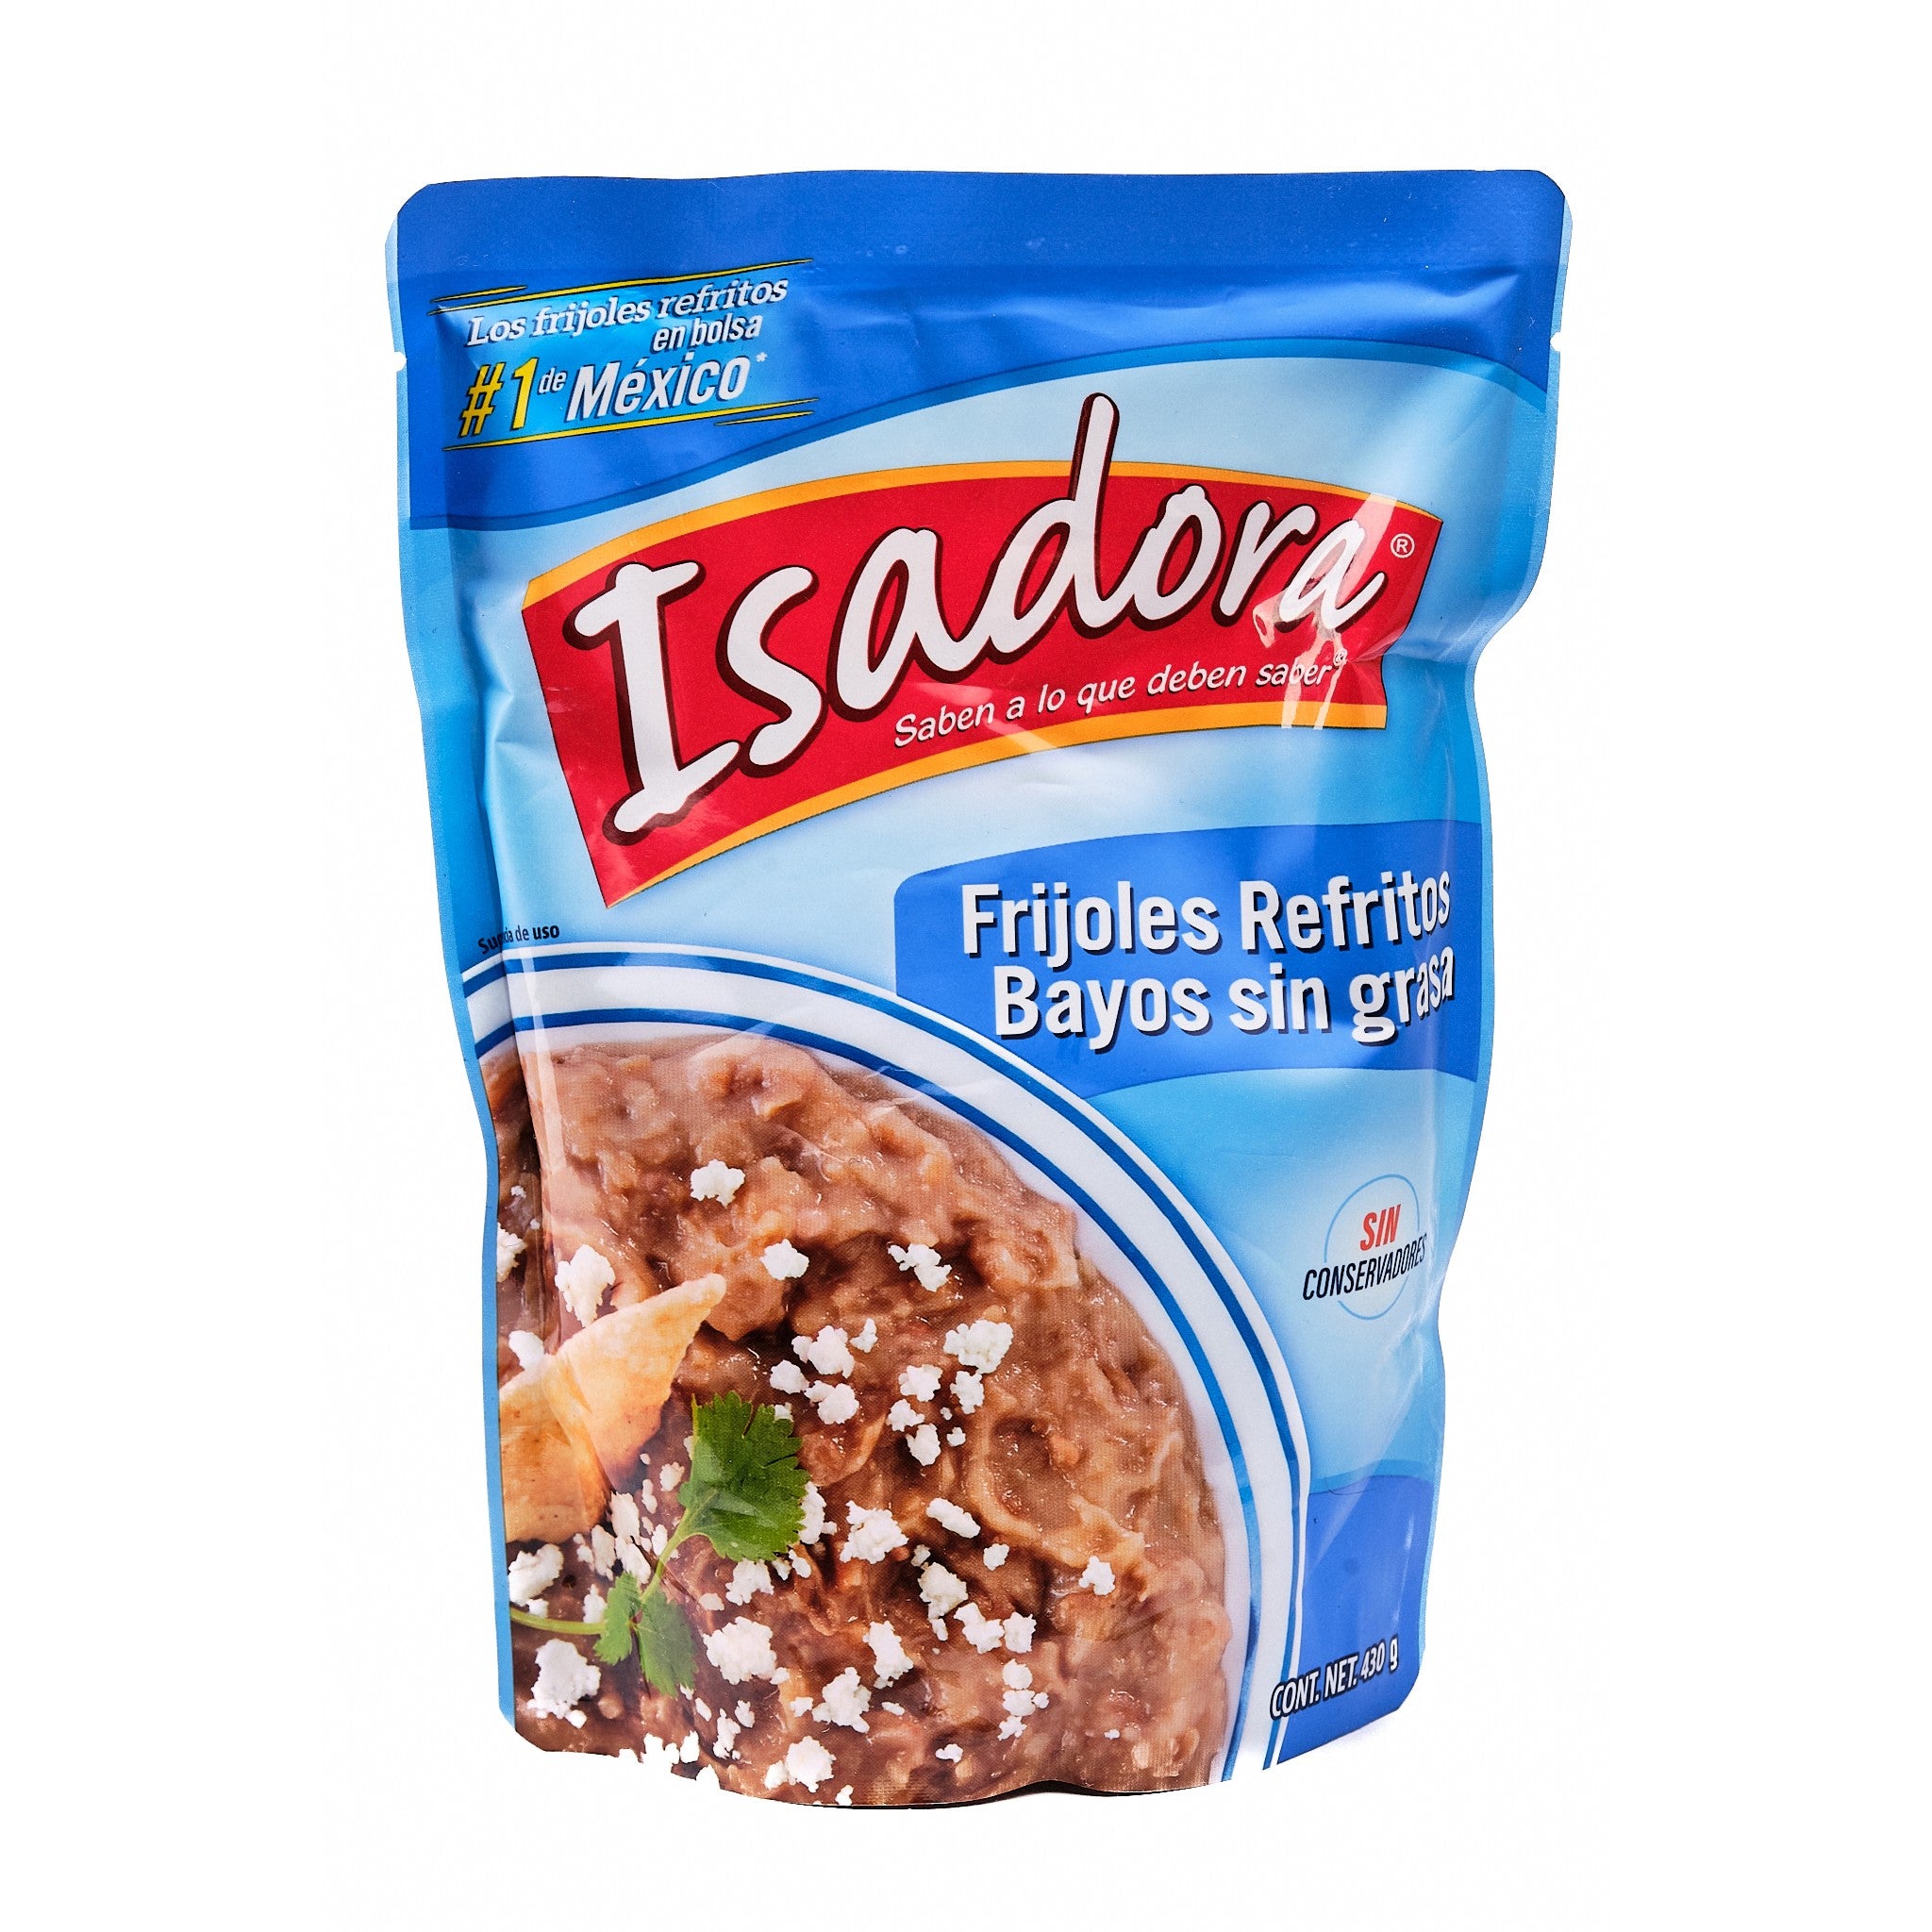 Refried Bayo Beans, Isadora - Low Fat